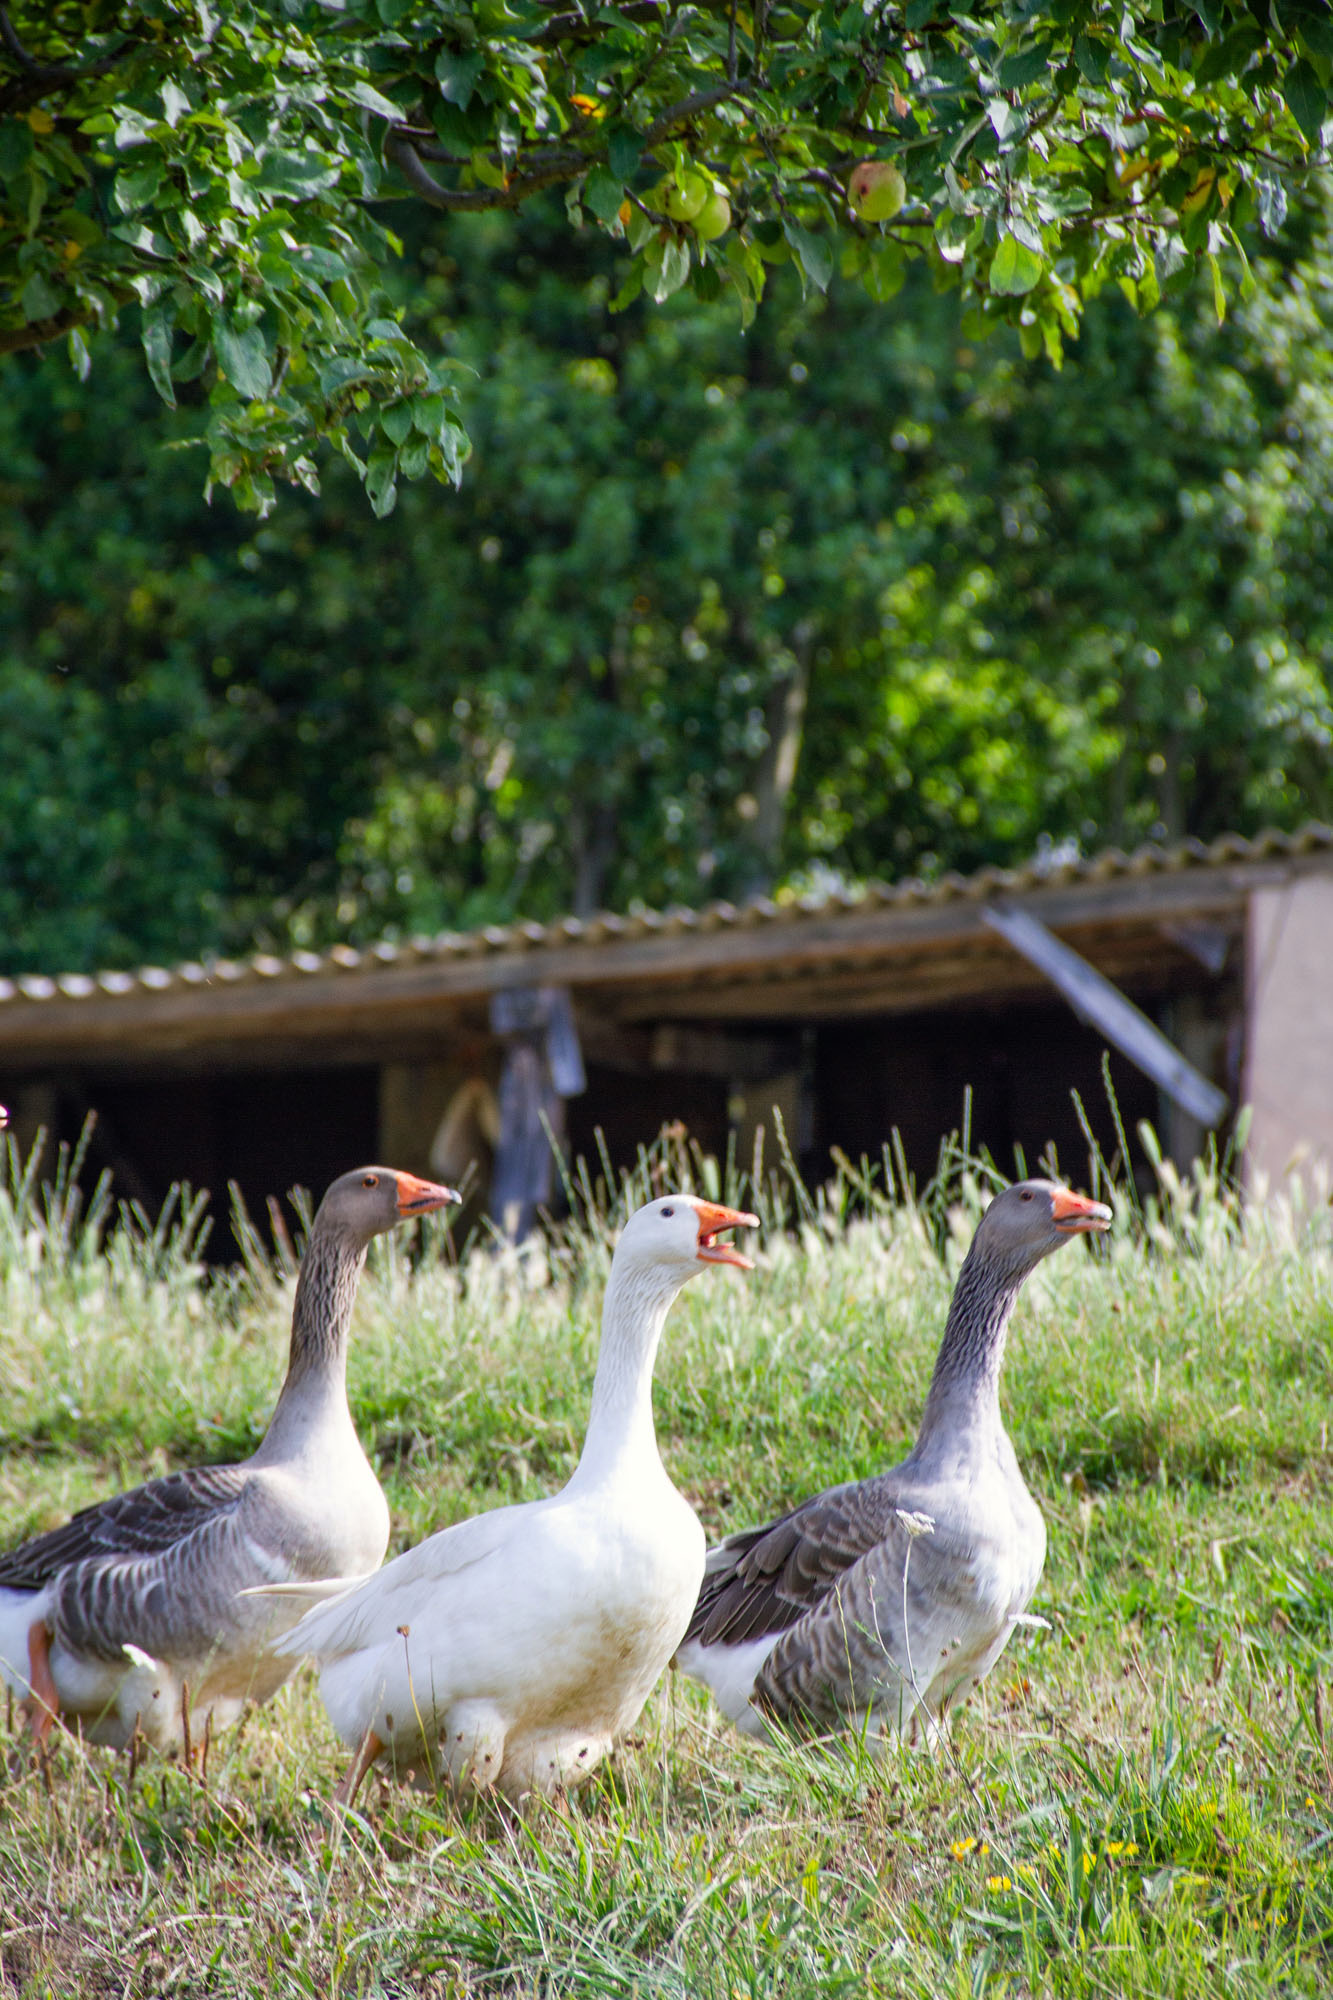 Geese of three